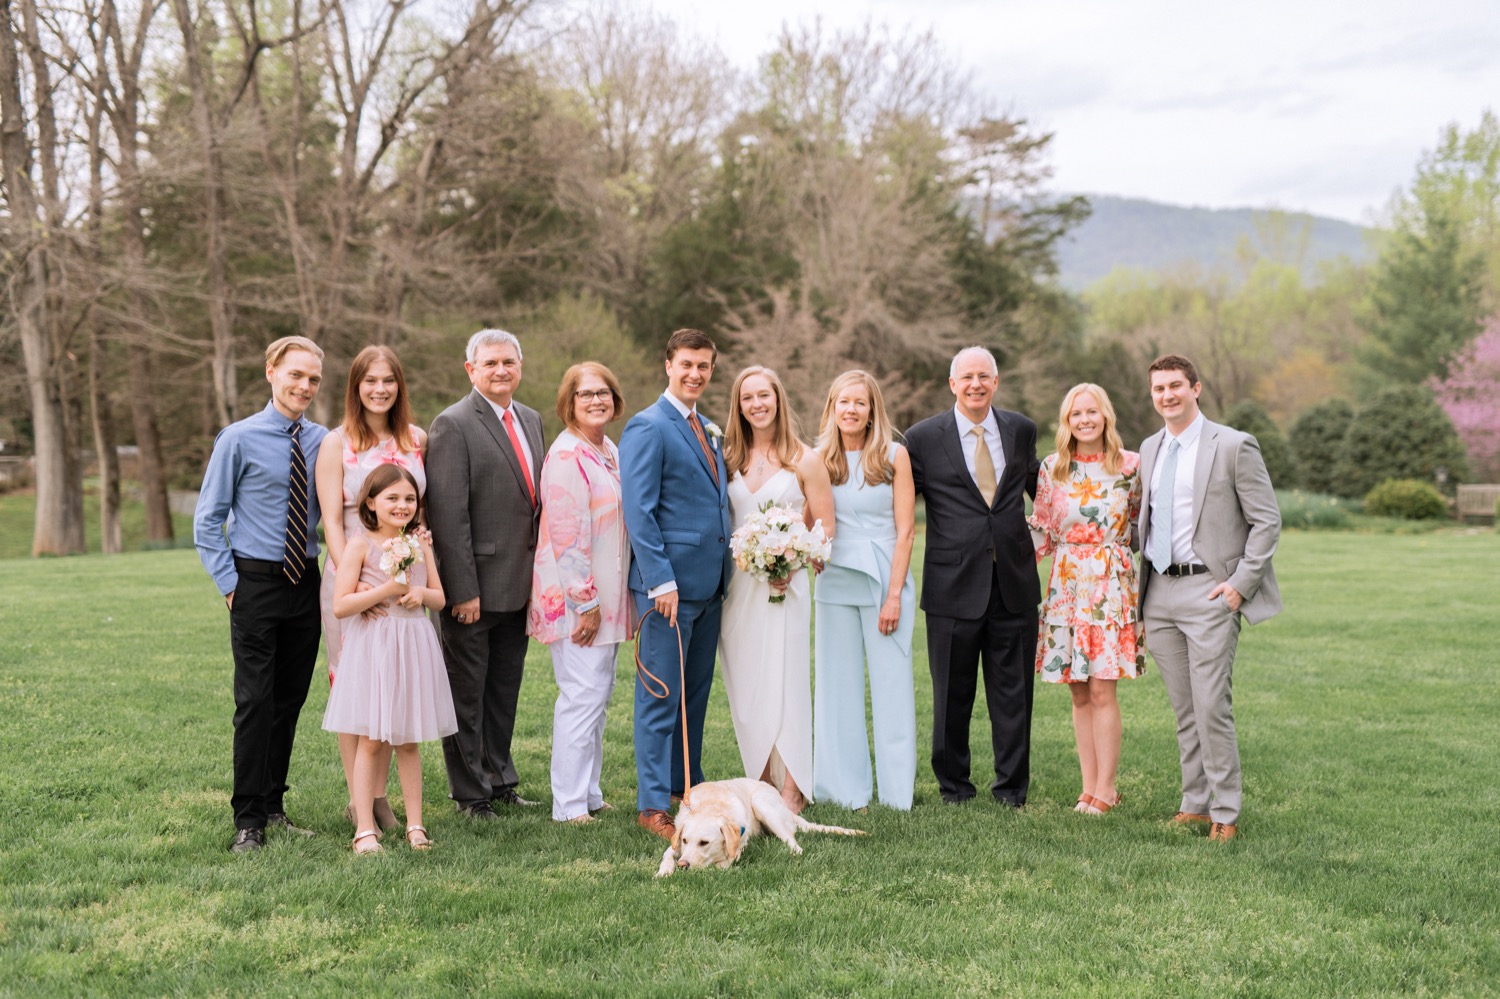 Wedding party posing with the family dog on the wedding day